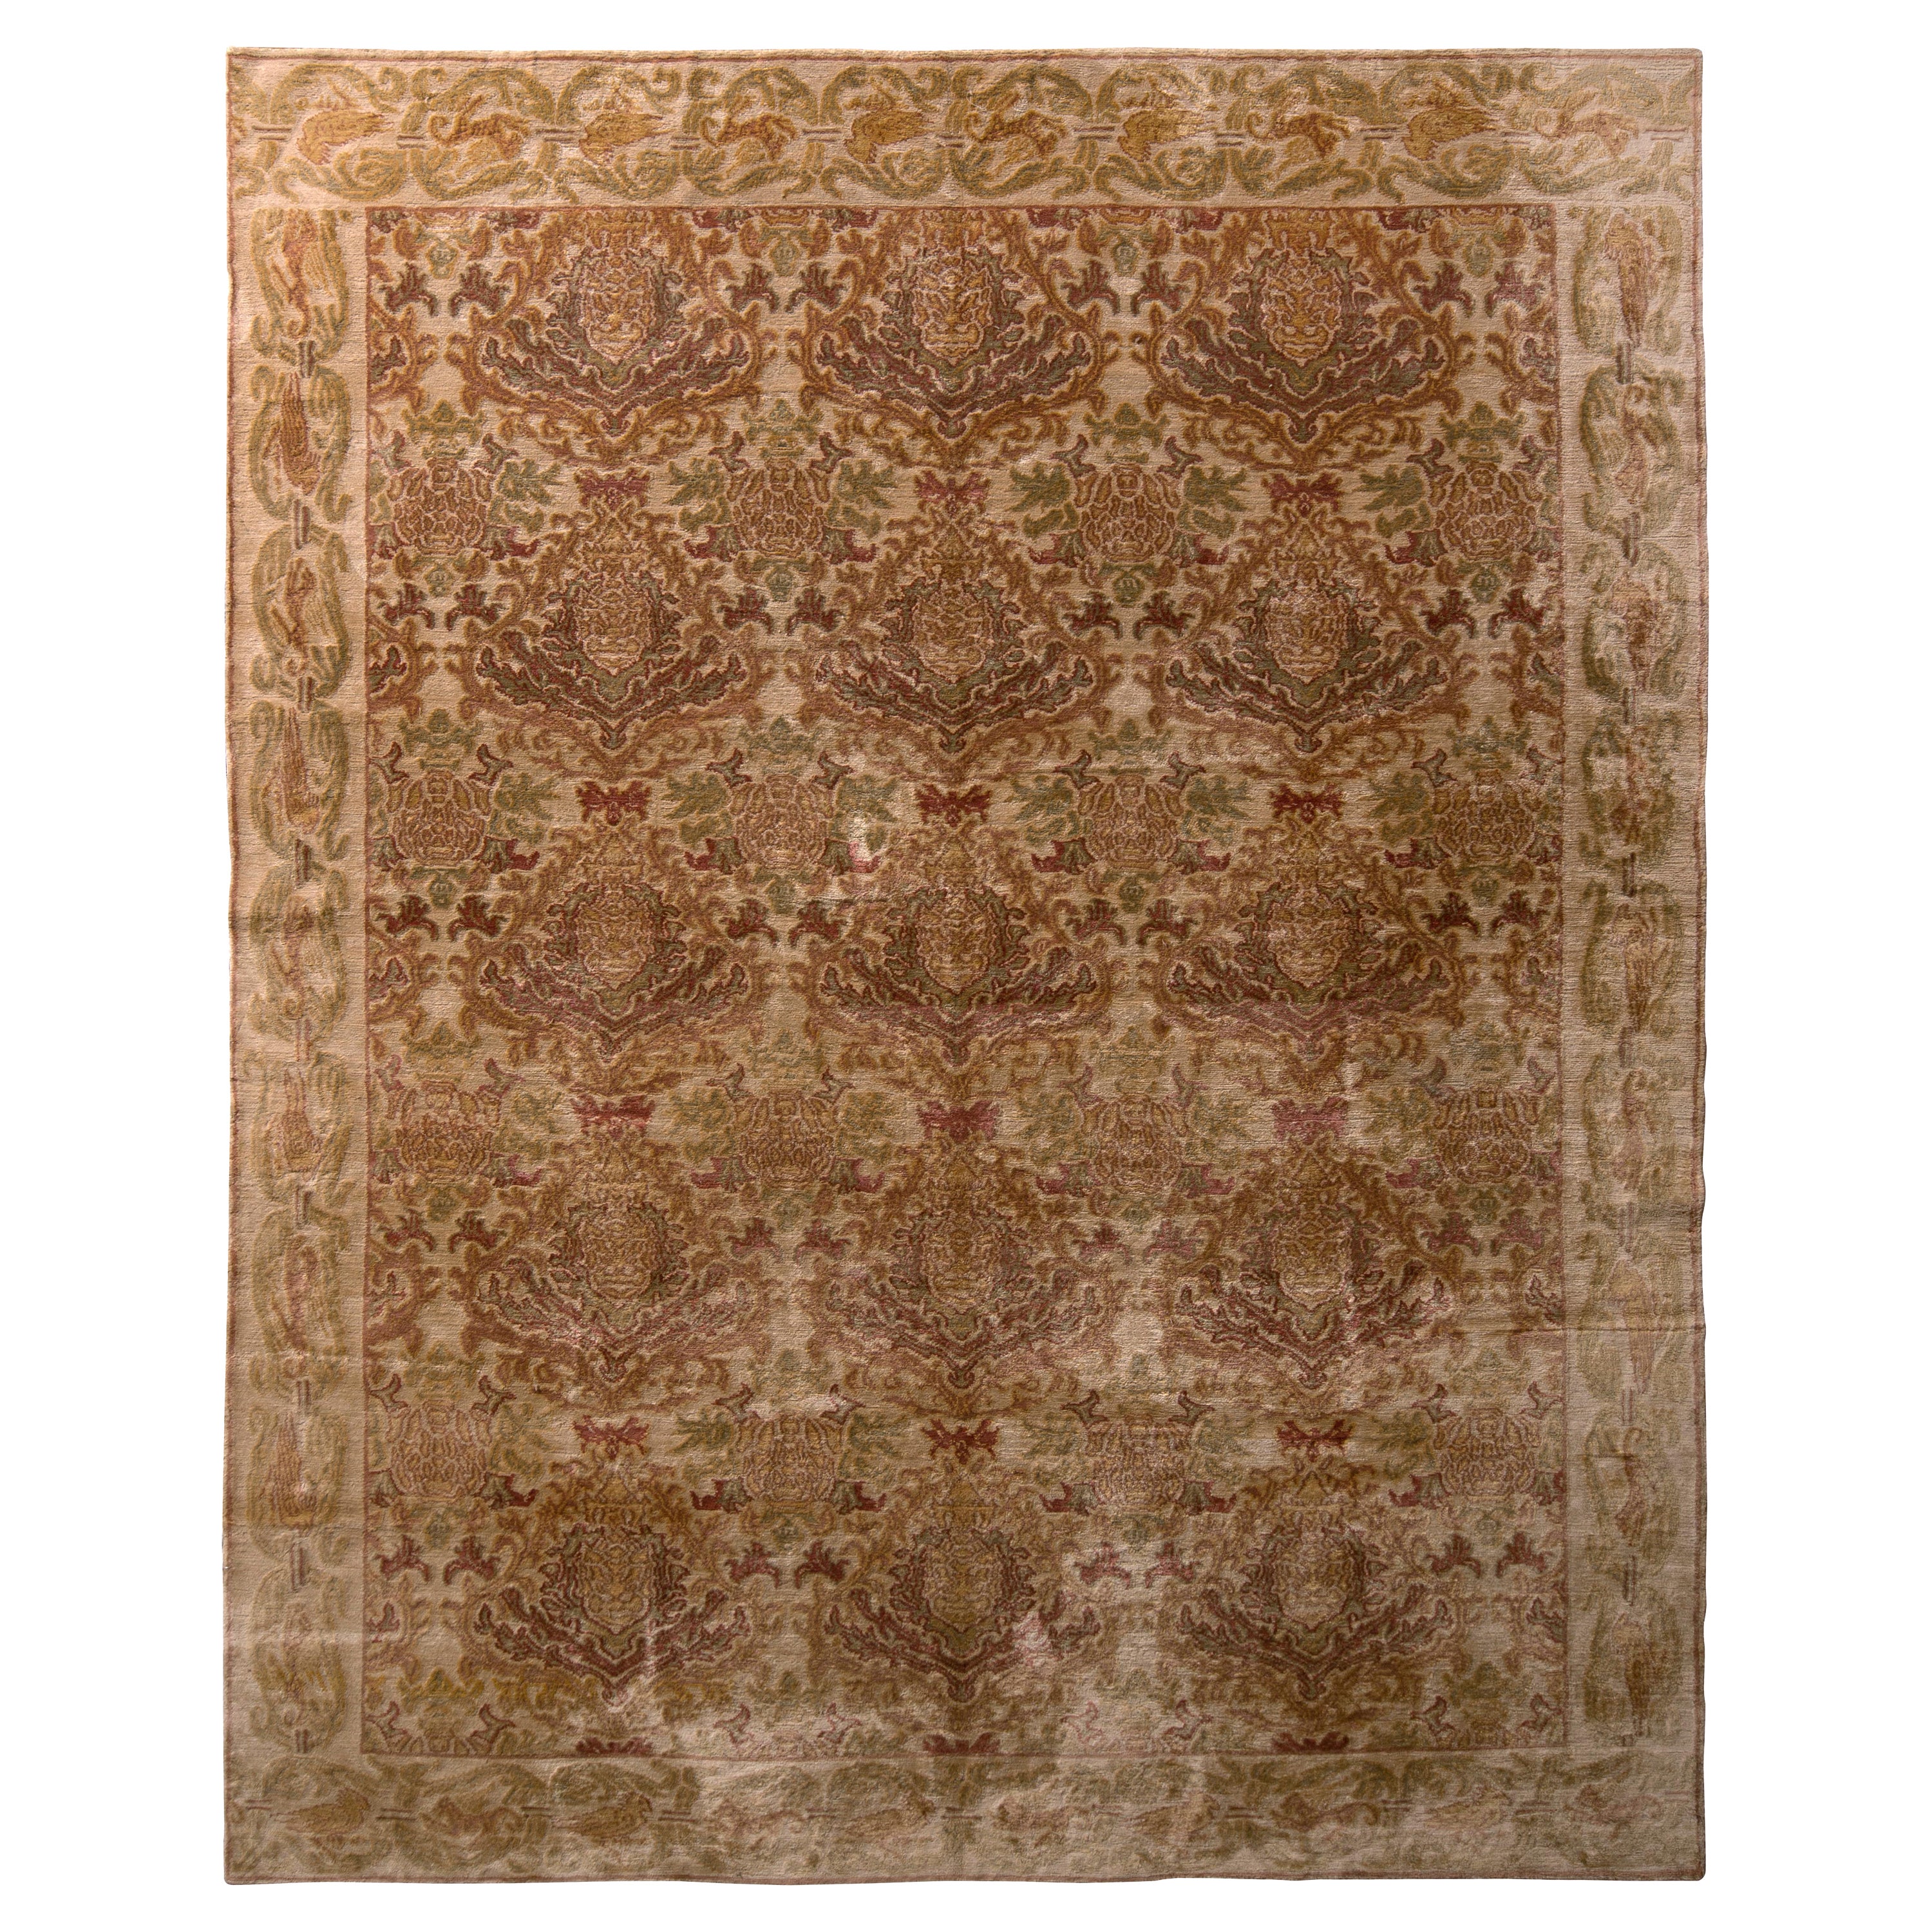 Rug & Kilim's Hand Knotted European Style Rug Beige Brown Pink Floral Pattern For Sale